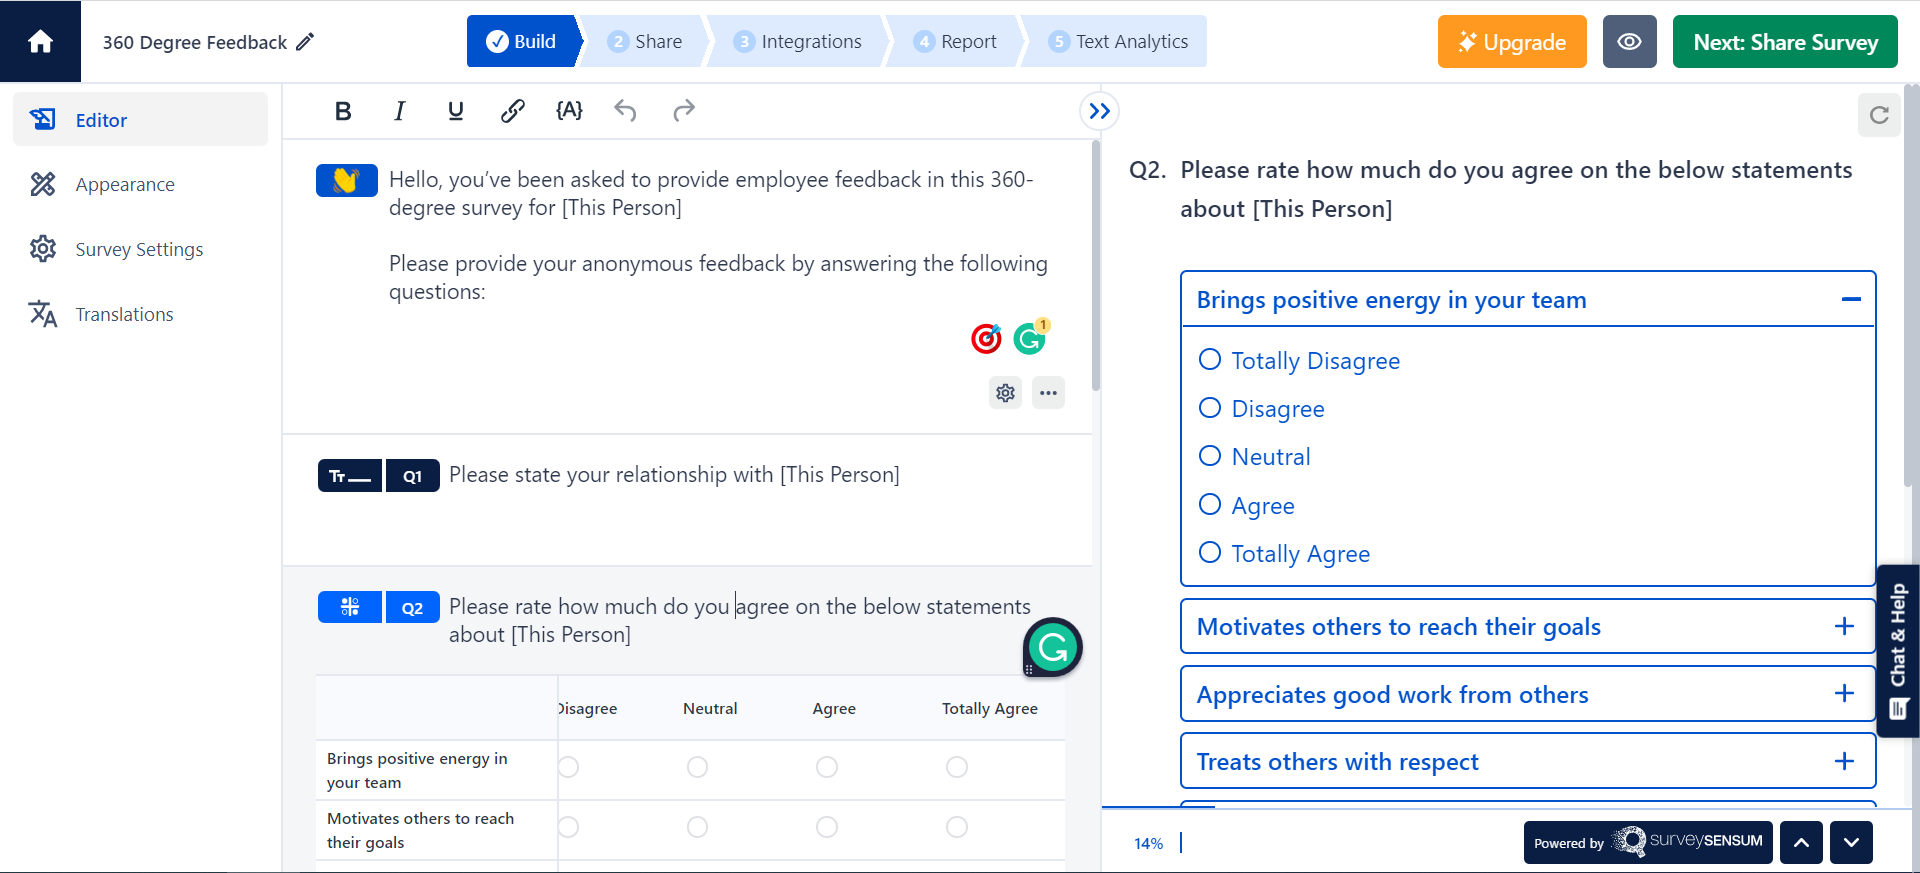 This is the image of the pre-designed survey template 360-degree feedback survey. The template has sample survey questions that can be customized. Also, the survey settings and themes can be customized.